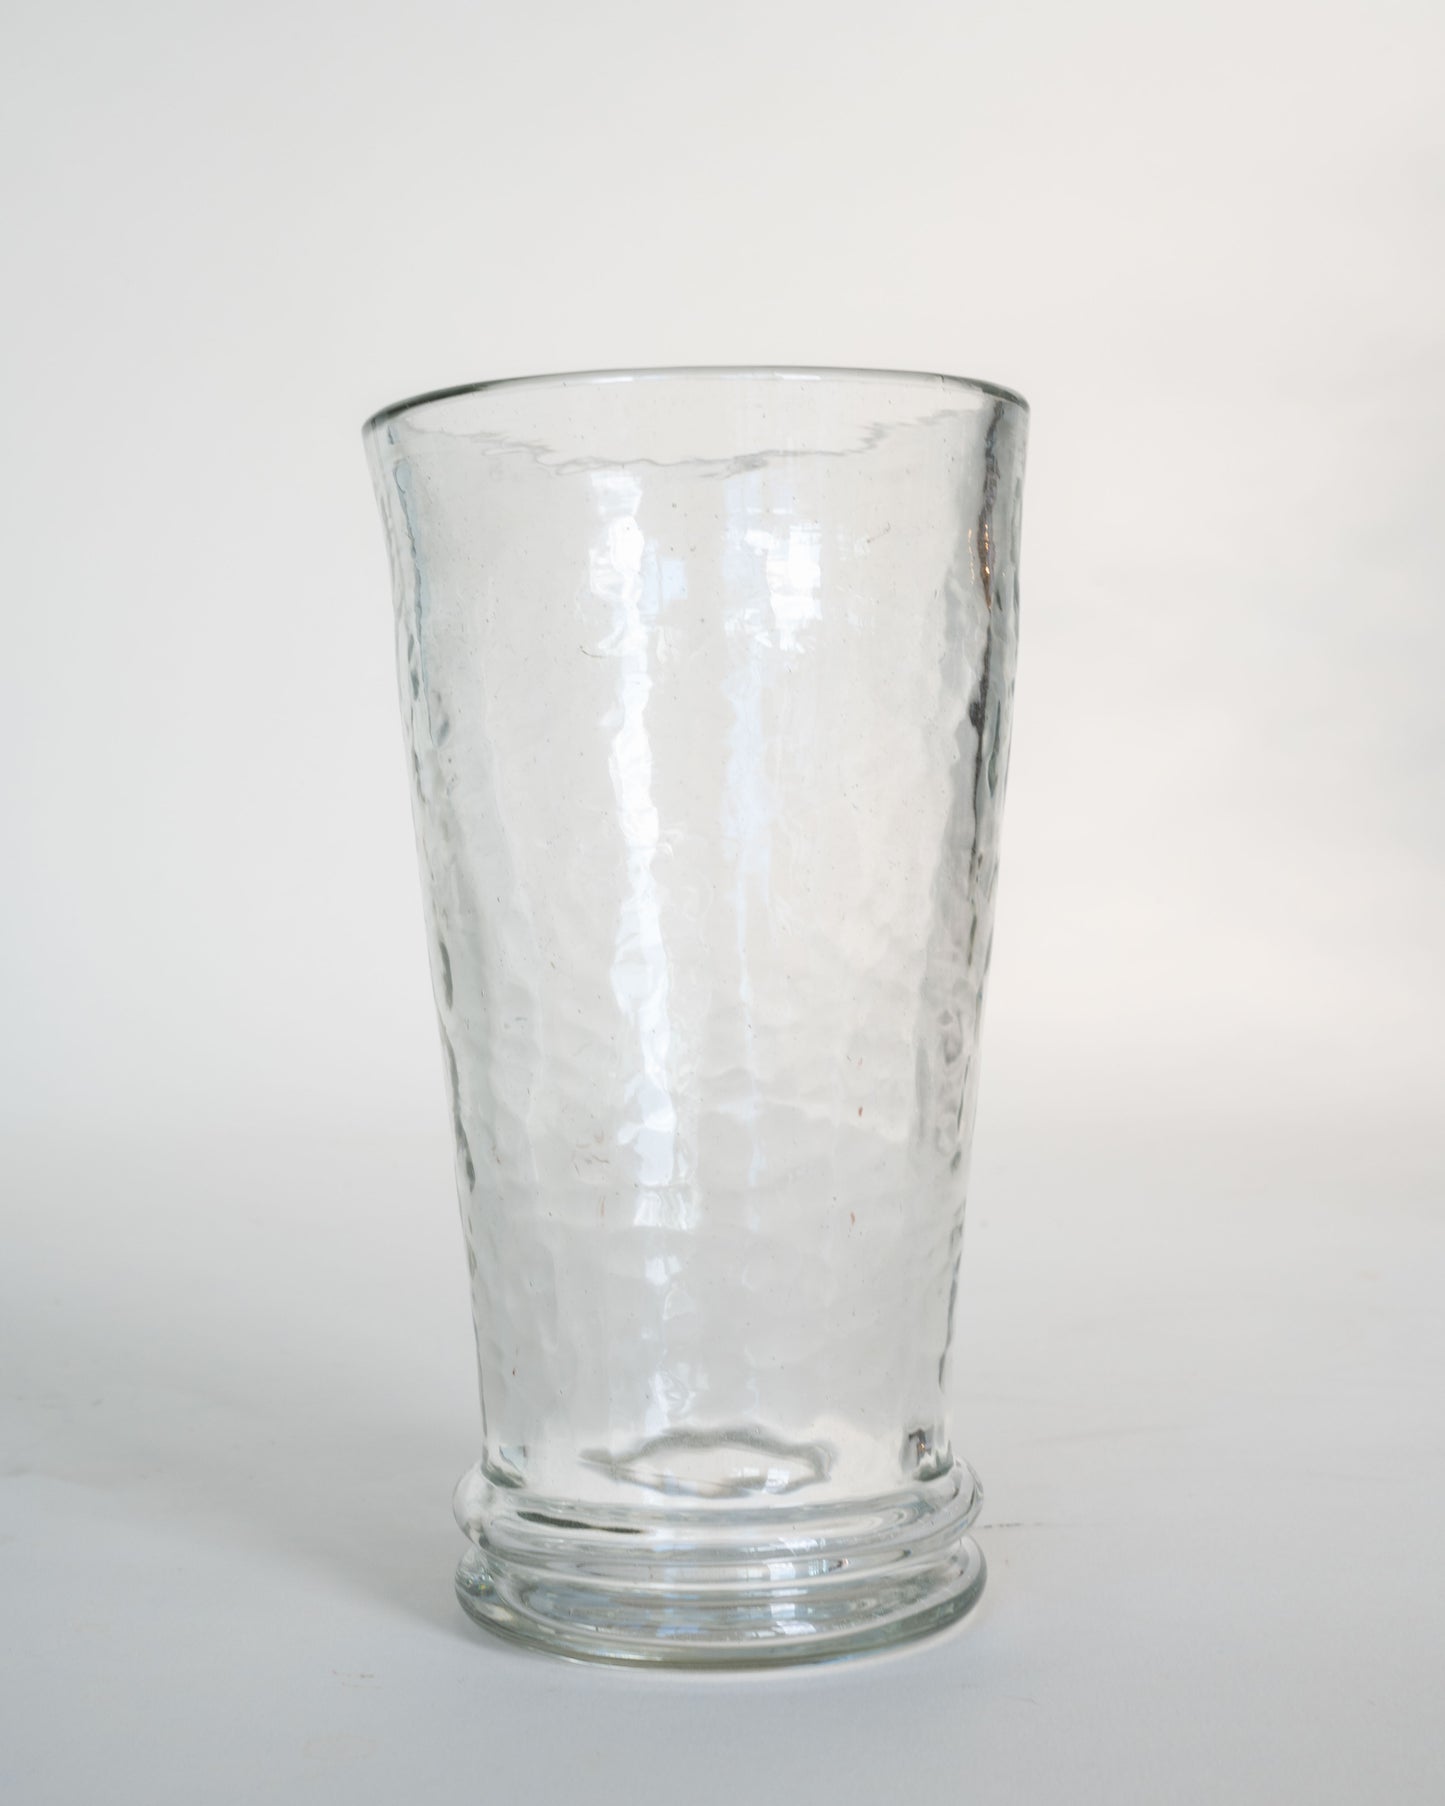 Recycled Glass Drinking Glass